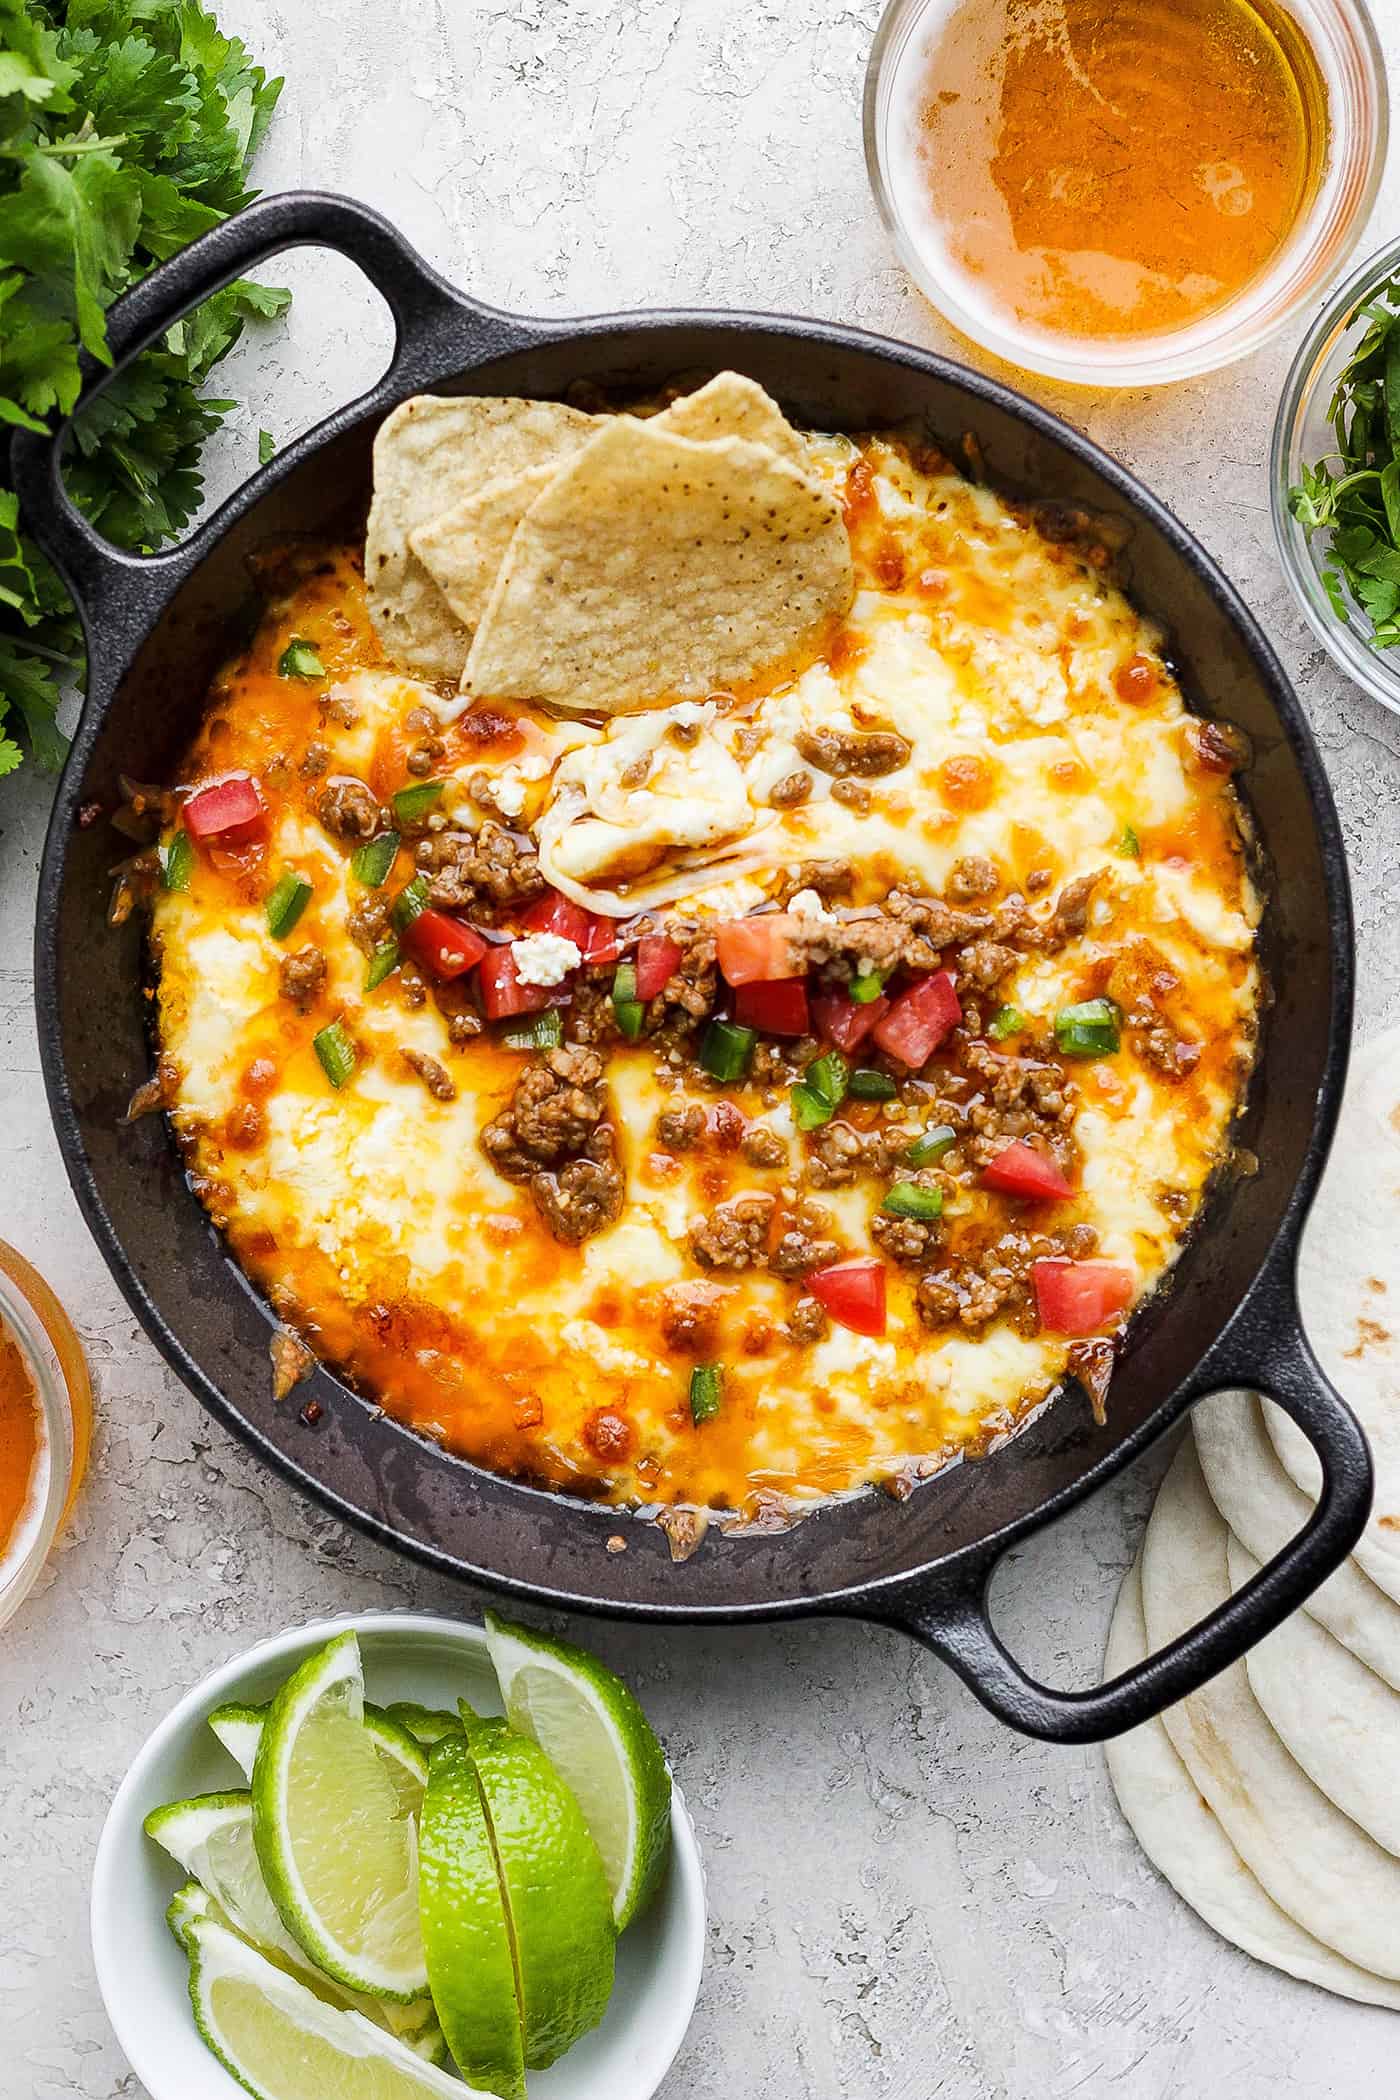 A black cast iron skillet of queso fundido topped with chorizo, tomatoes, and jalapeno and garnished with tortilla chips, with lime wedges on the side.